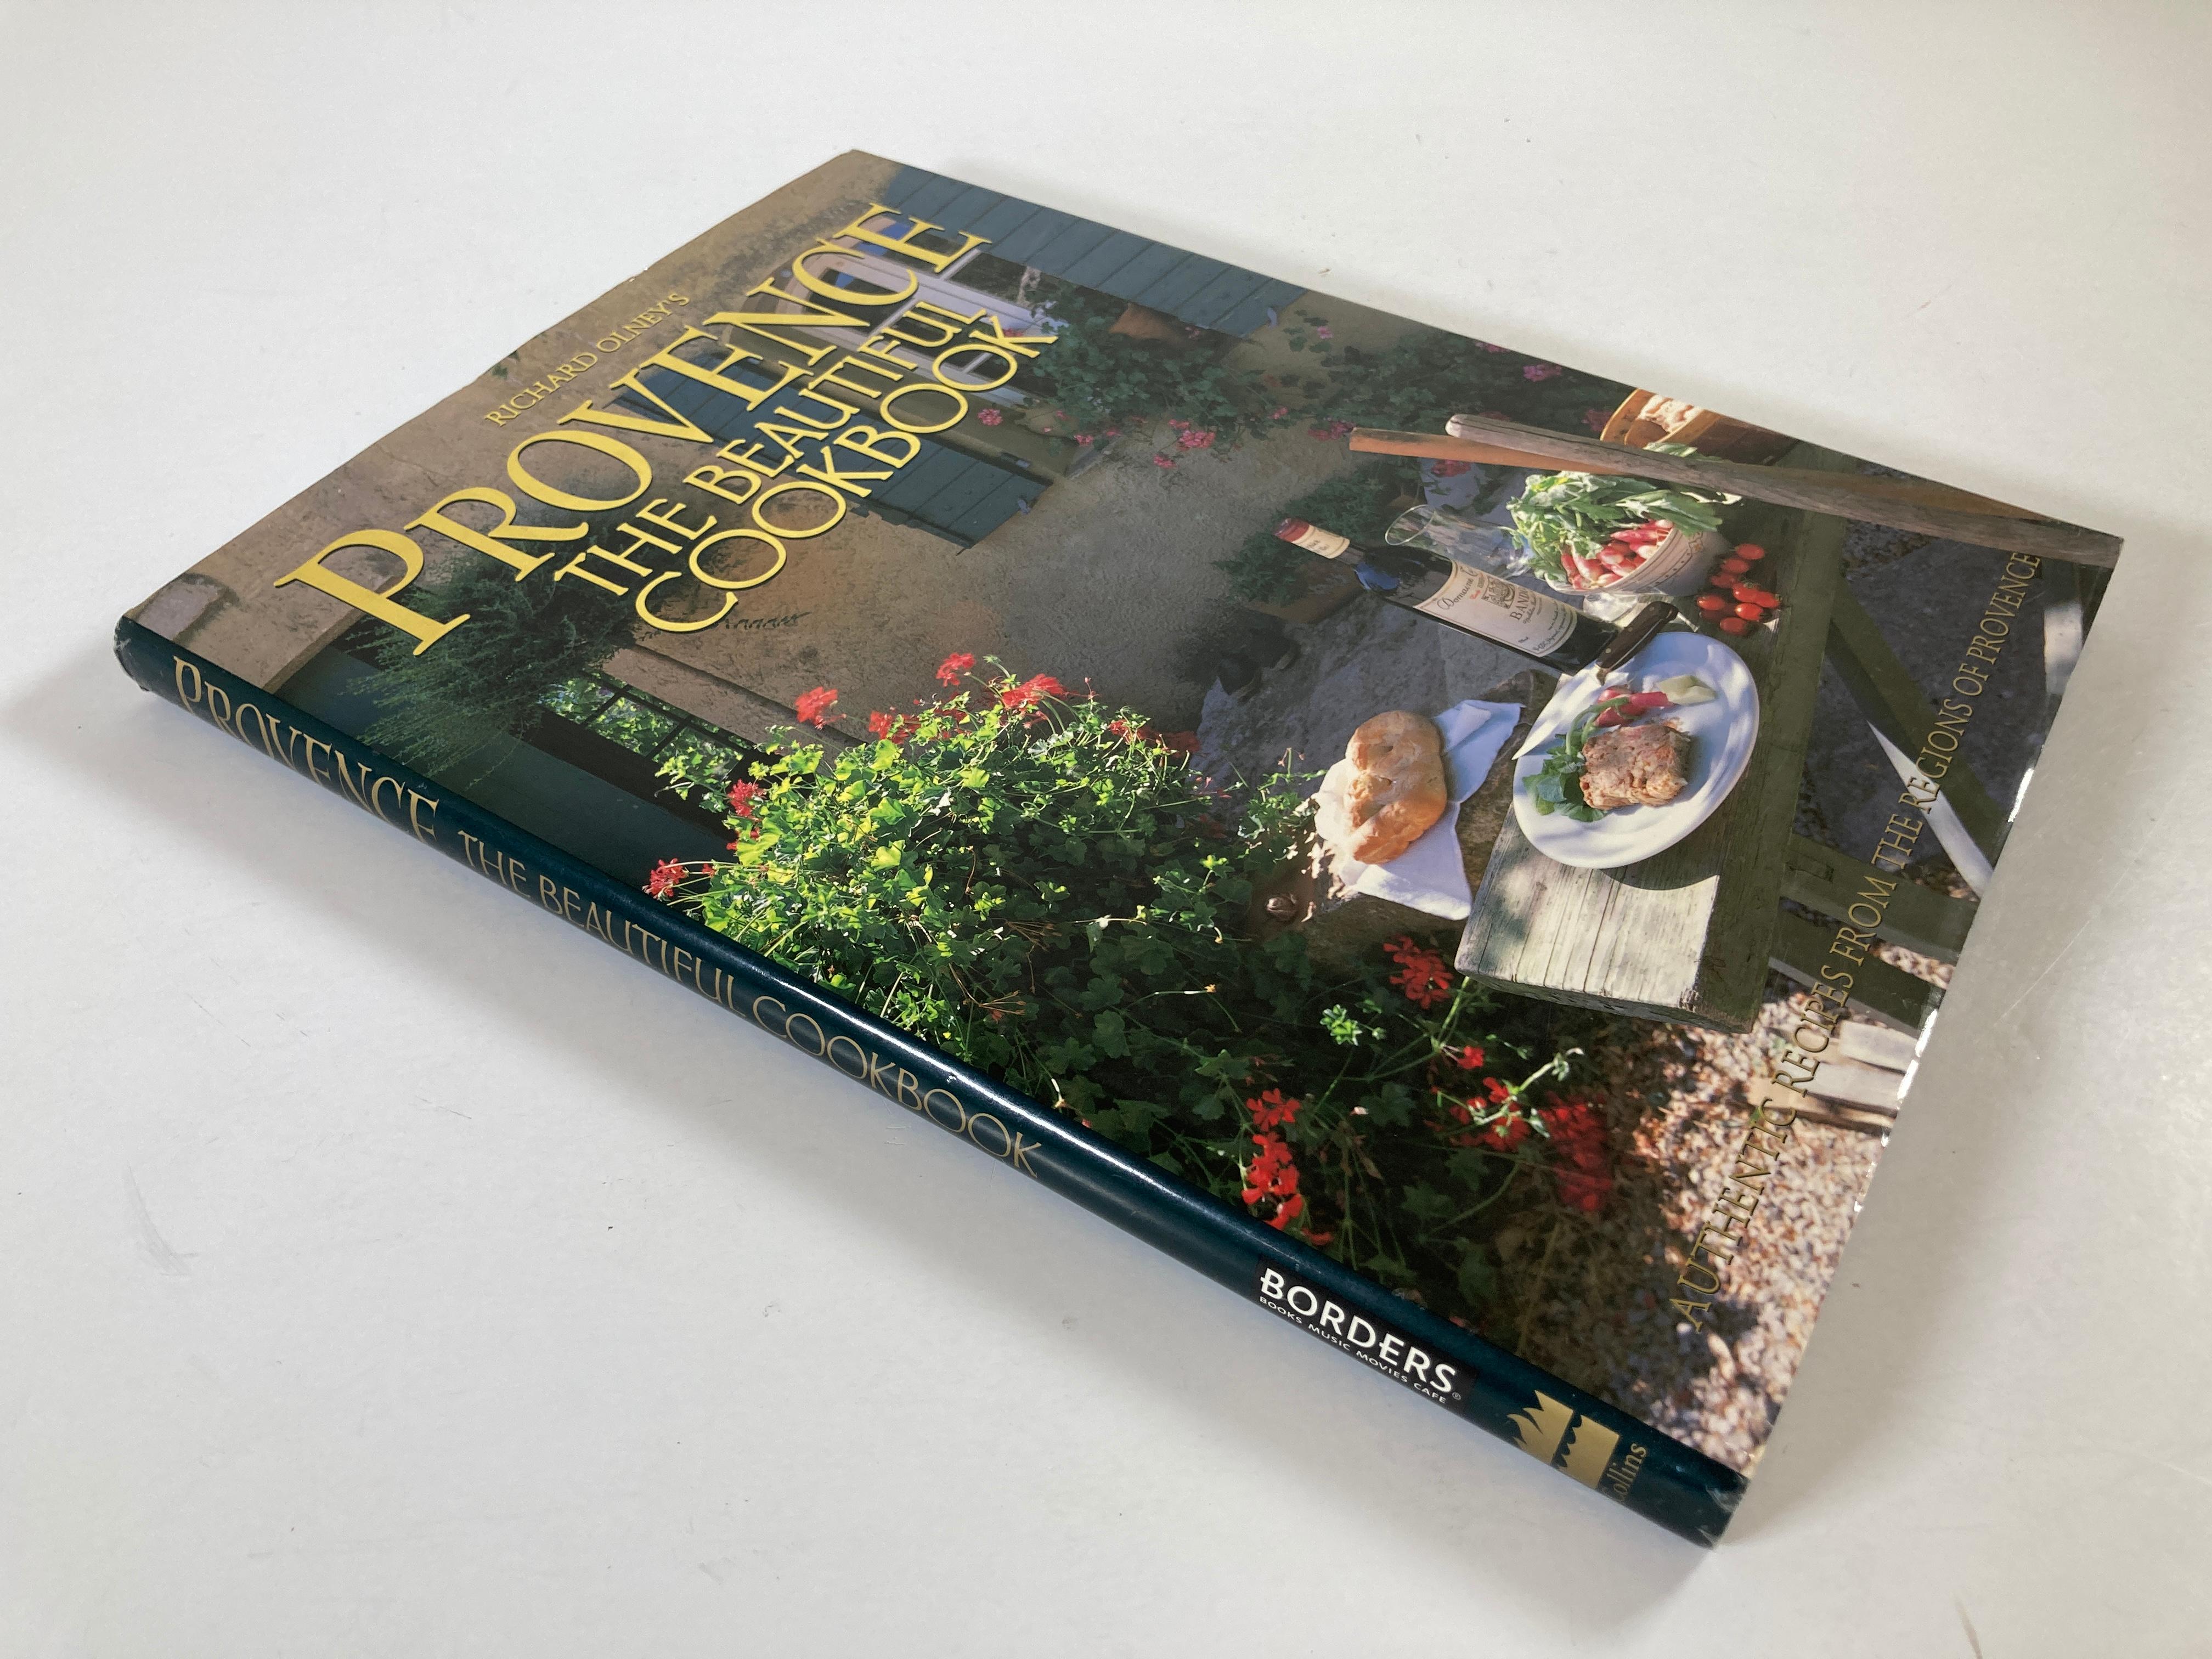 Provence: the Beautiful Cookbook Richard Olney hardcover book
Synopsis:
This Volume guides readers through the culinary and geographical landscape of France’s golden province. A delicious cuisine incorporating traditional foods and methods. 250